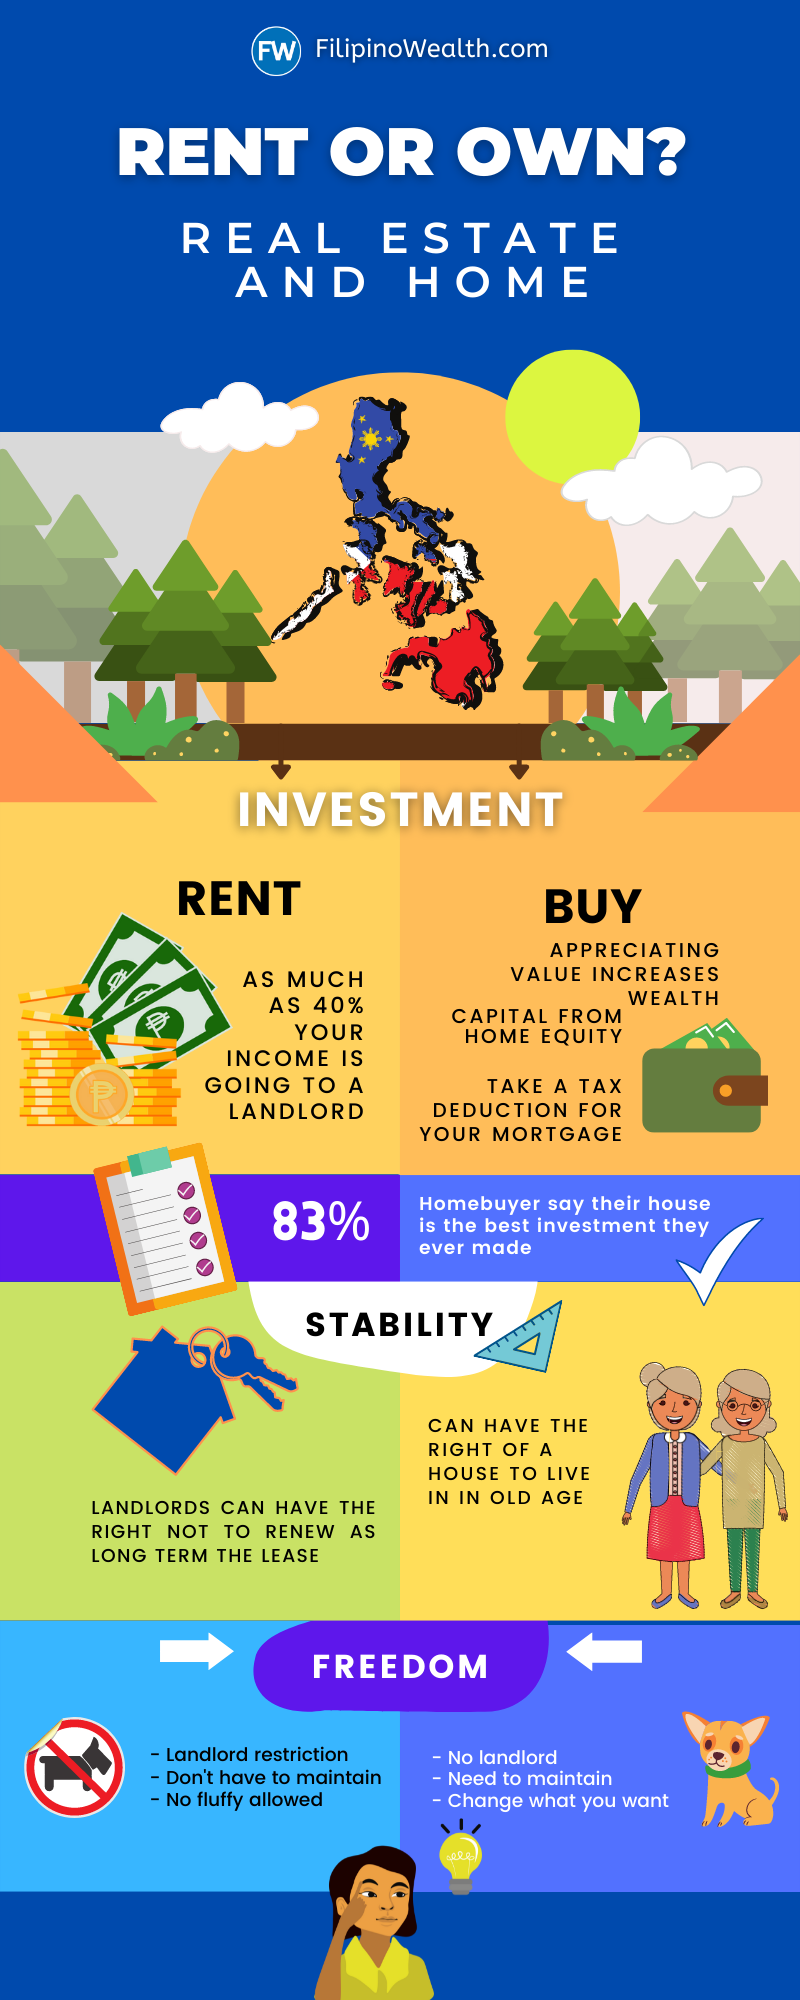 why invest real estate philippines